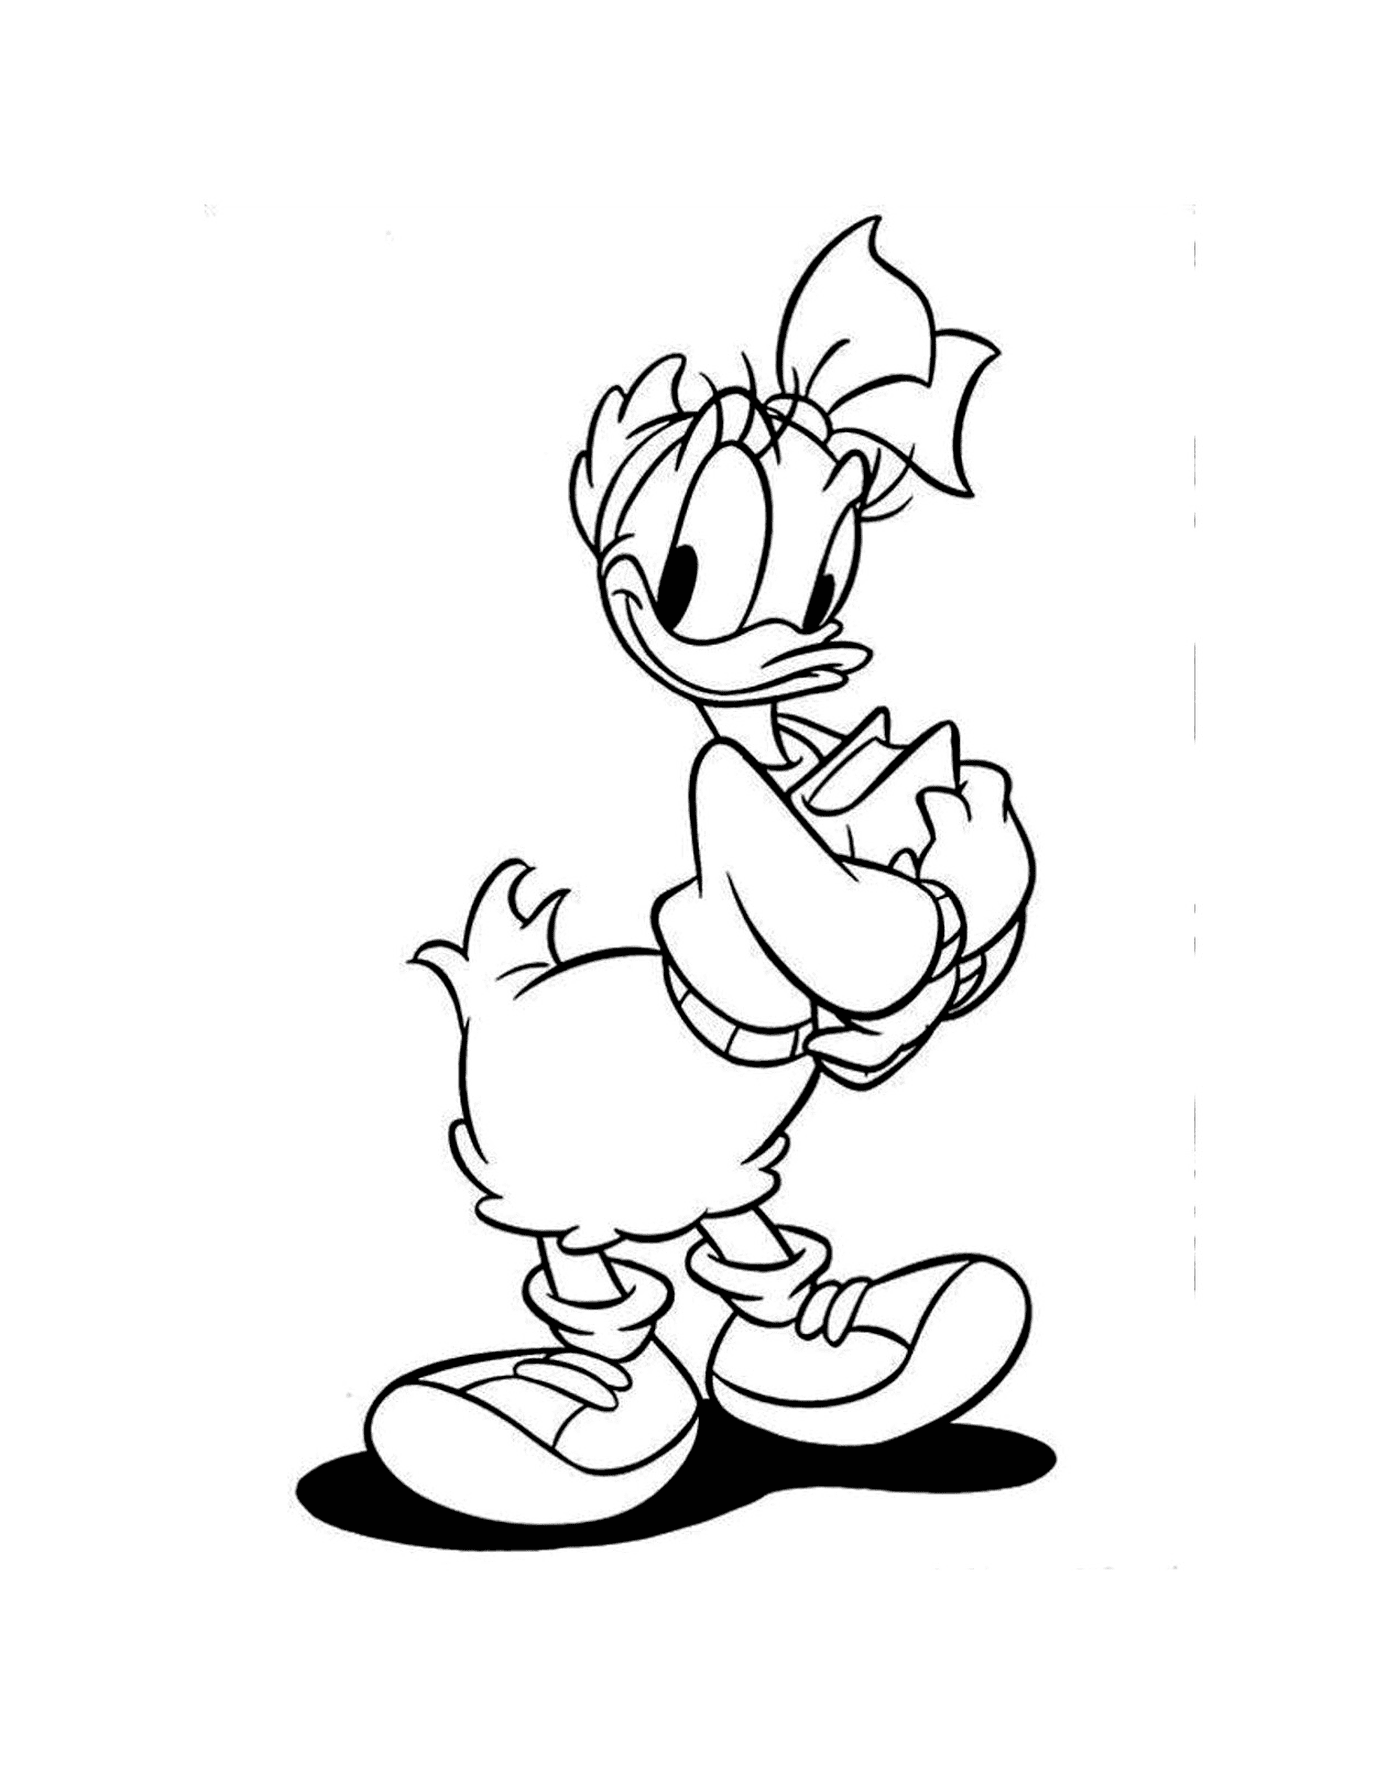  Donald Duck in love with Daisy Duck 